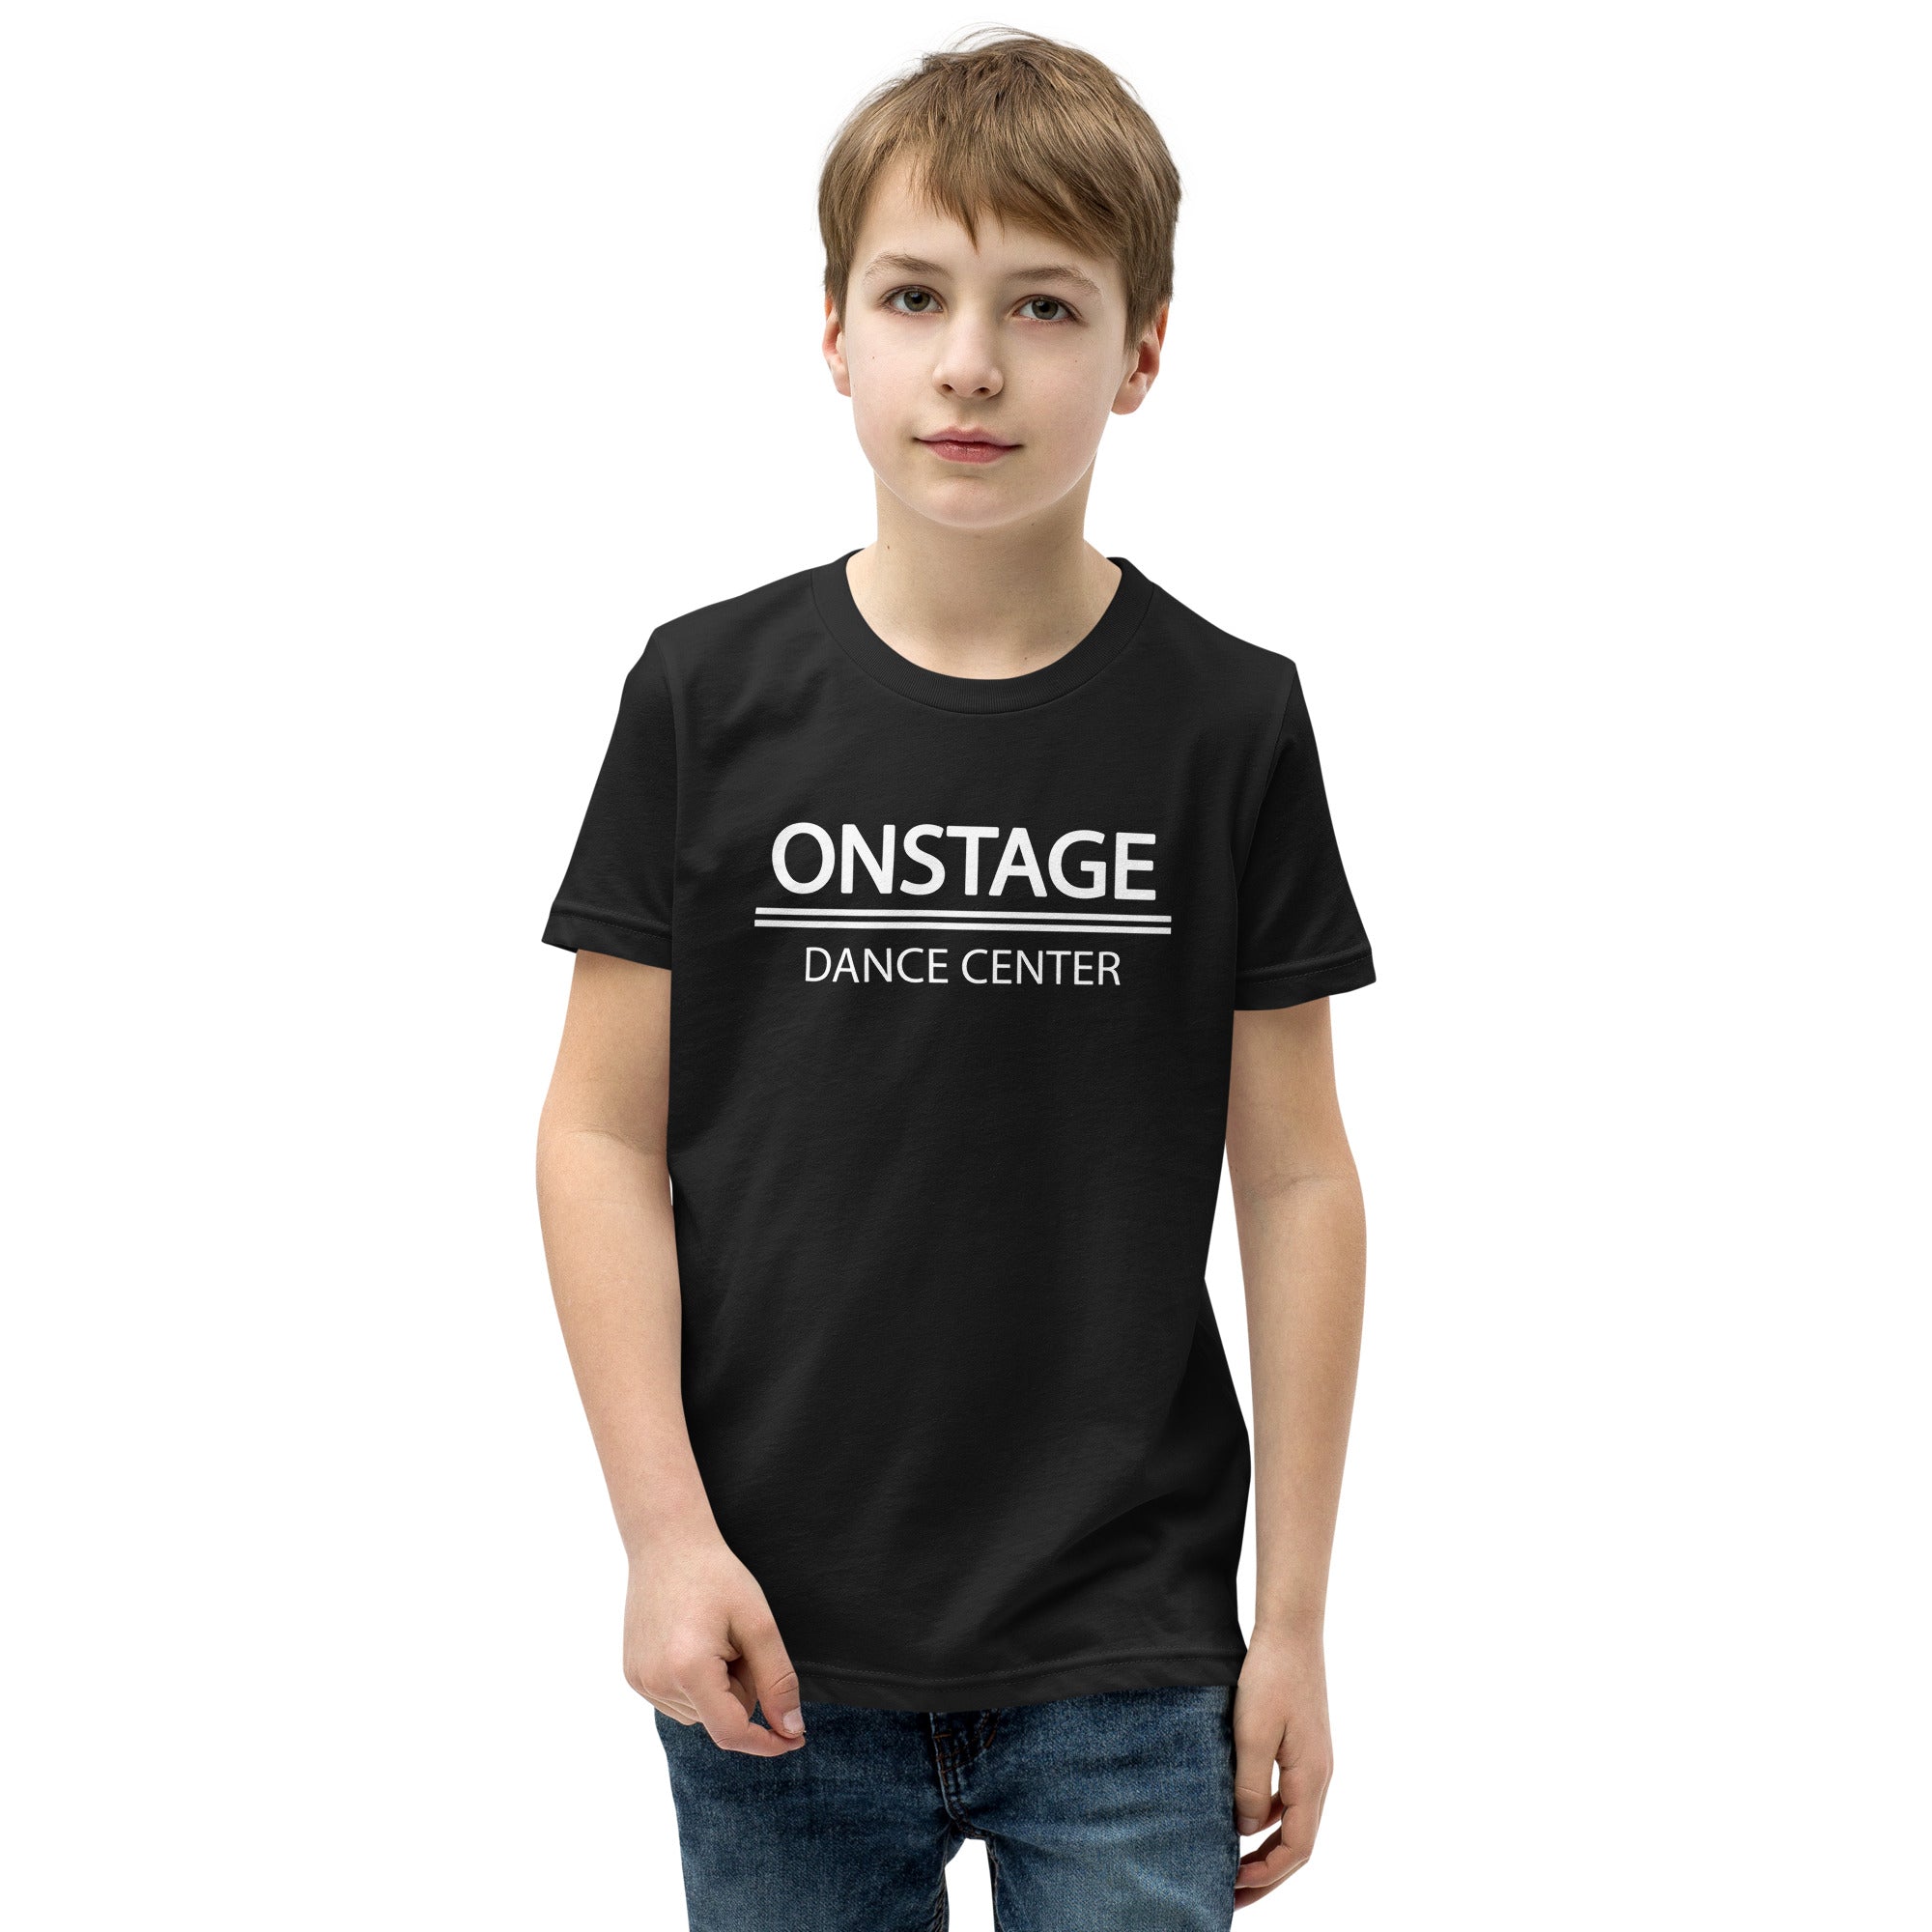 ONSTAGE Youth T-Shirt